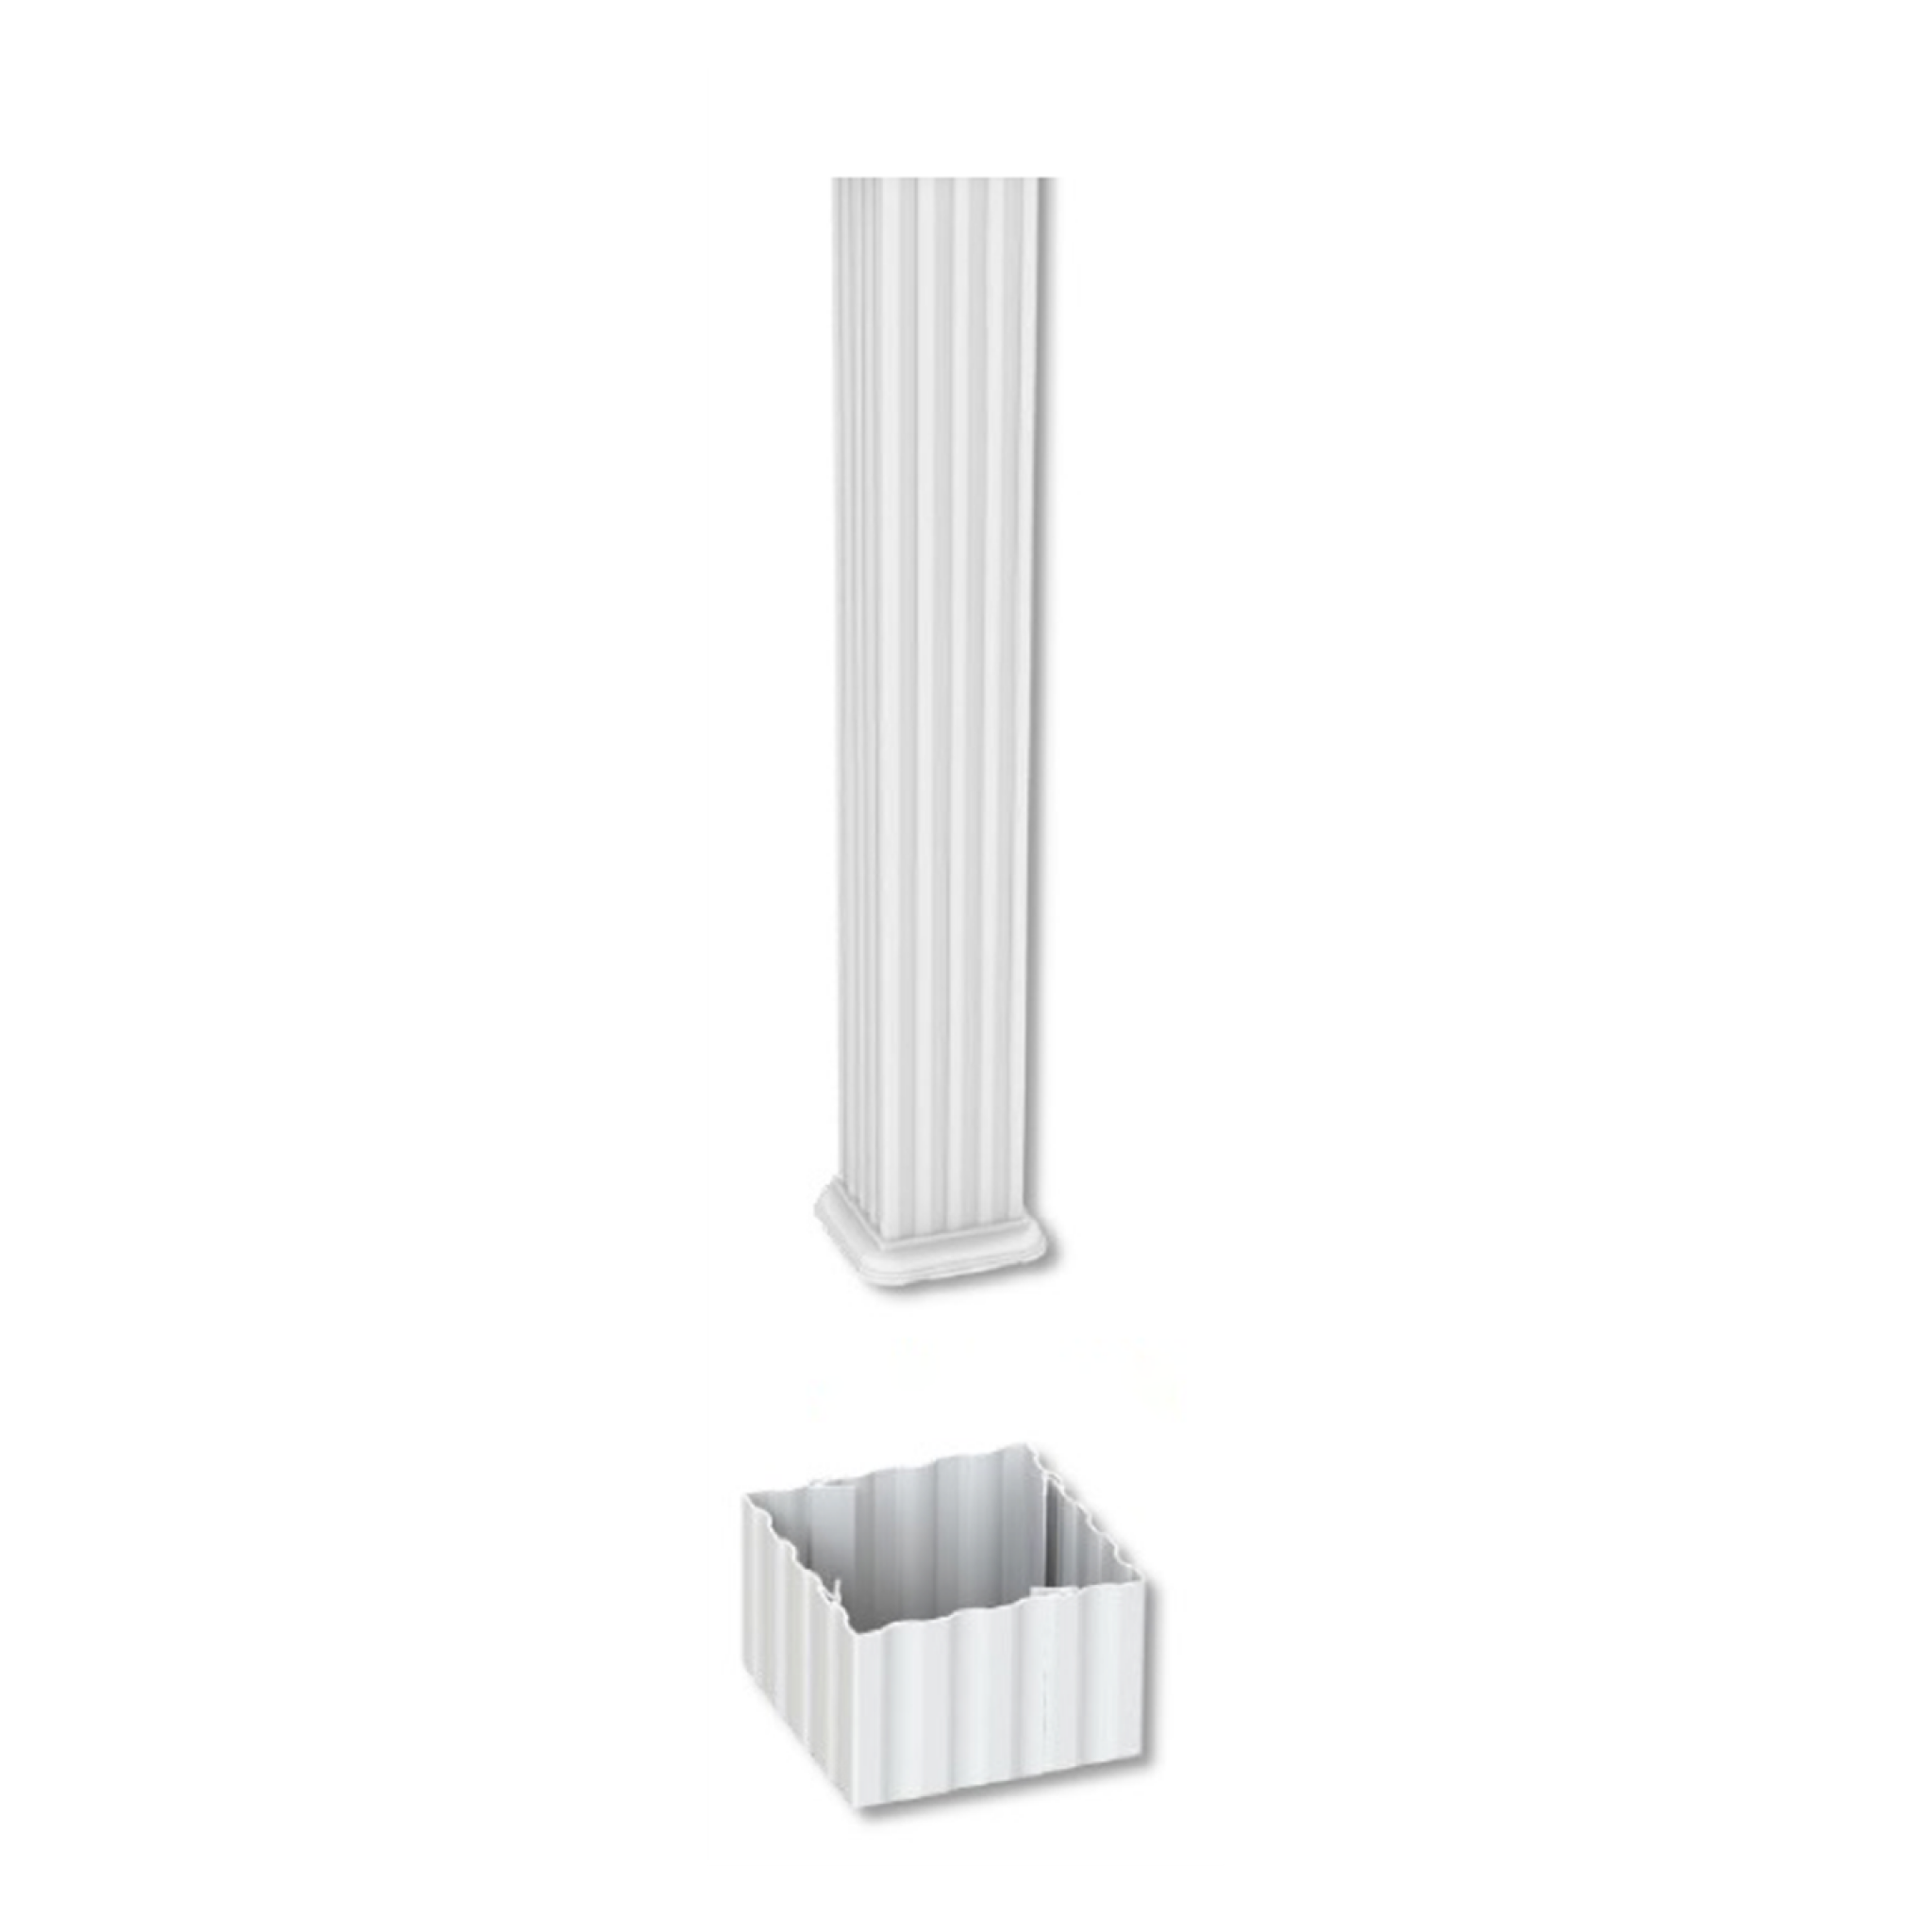 6"x10' Square Fluted Column